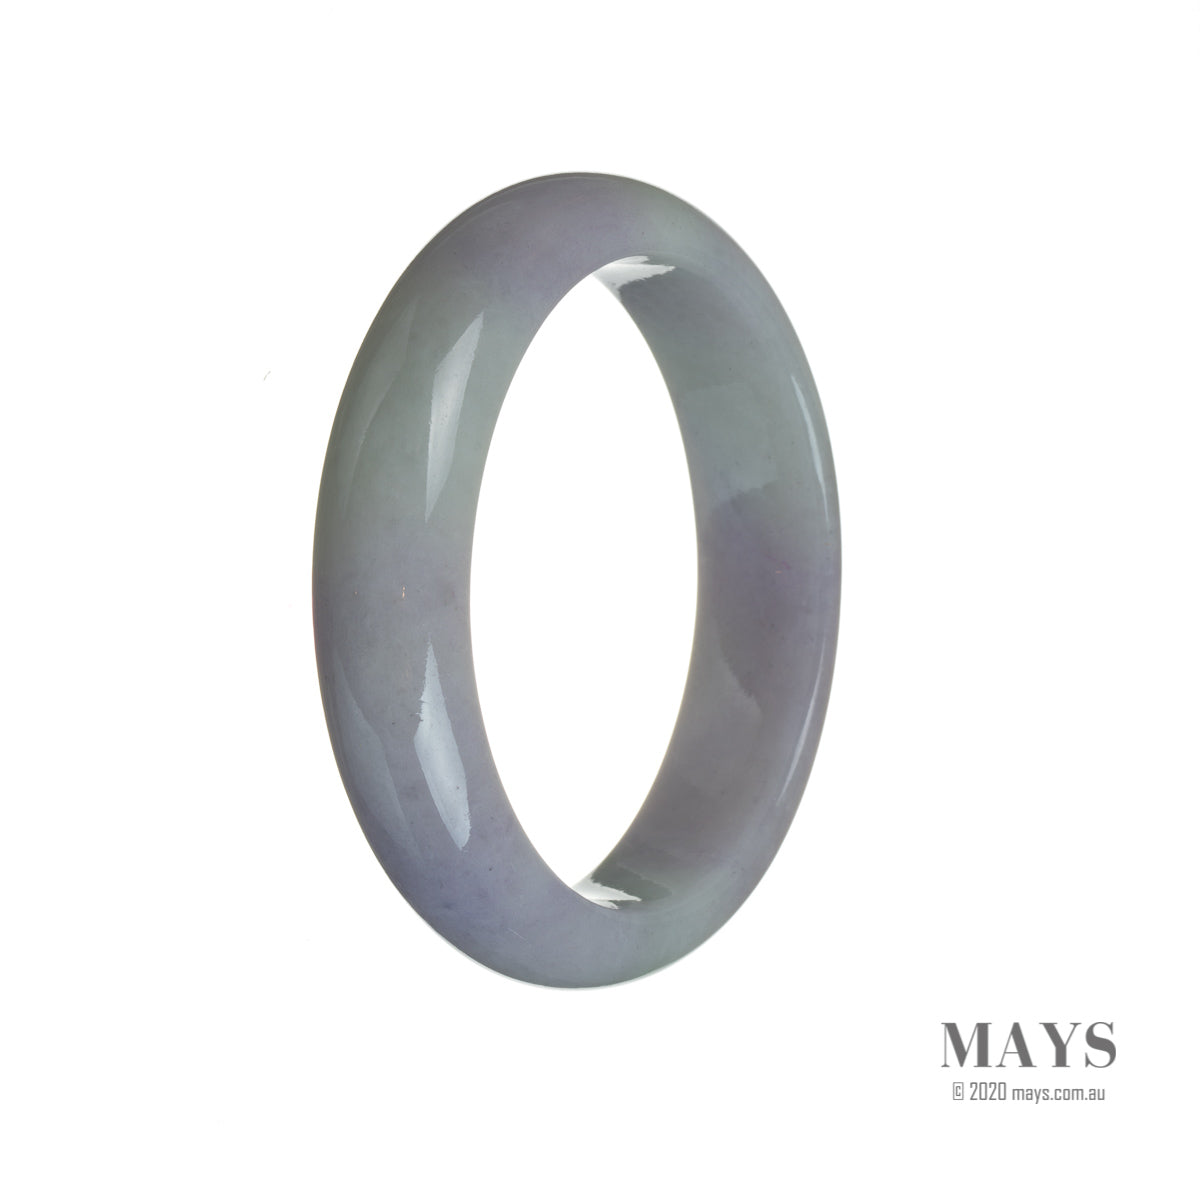 A close-up image of a lavender-colored Burmese jade bangle bracelet. The bracelet is semi-round in shape and has a smooth, polished surface. It measures 57mm in diameter. The bracelet exudes an authentic and natural aesthetic, showcasing the beauty of the lavender jade stone. The brand name "MAYS™" is mentioned as the maker of this bracelet.